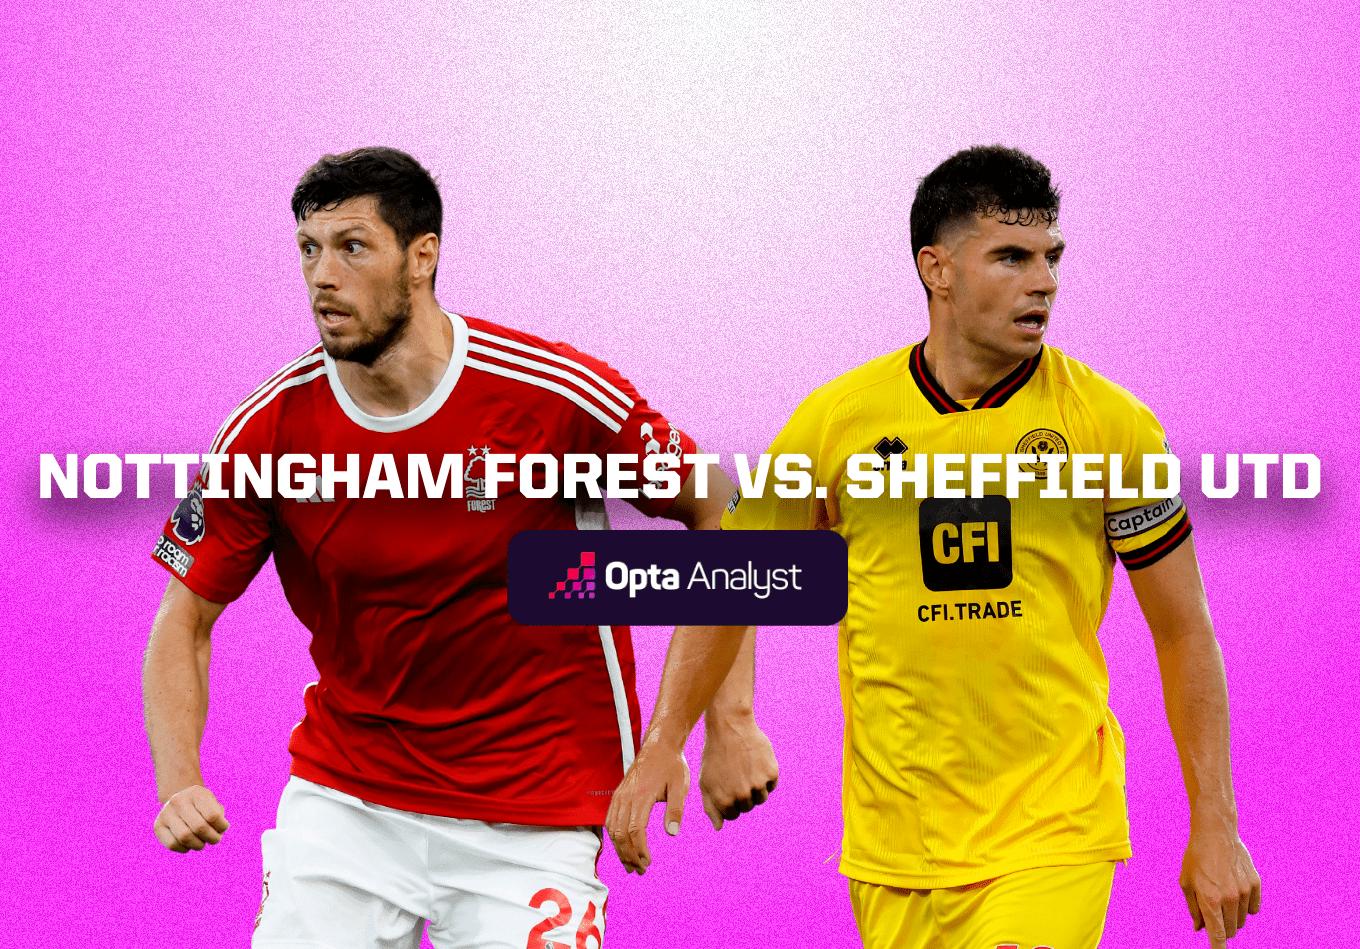 Nottingham Forest vs Sheffield United: Prediction and Preview